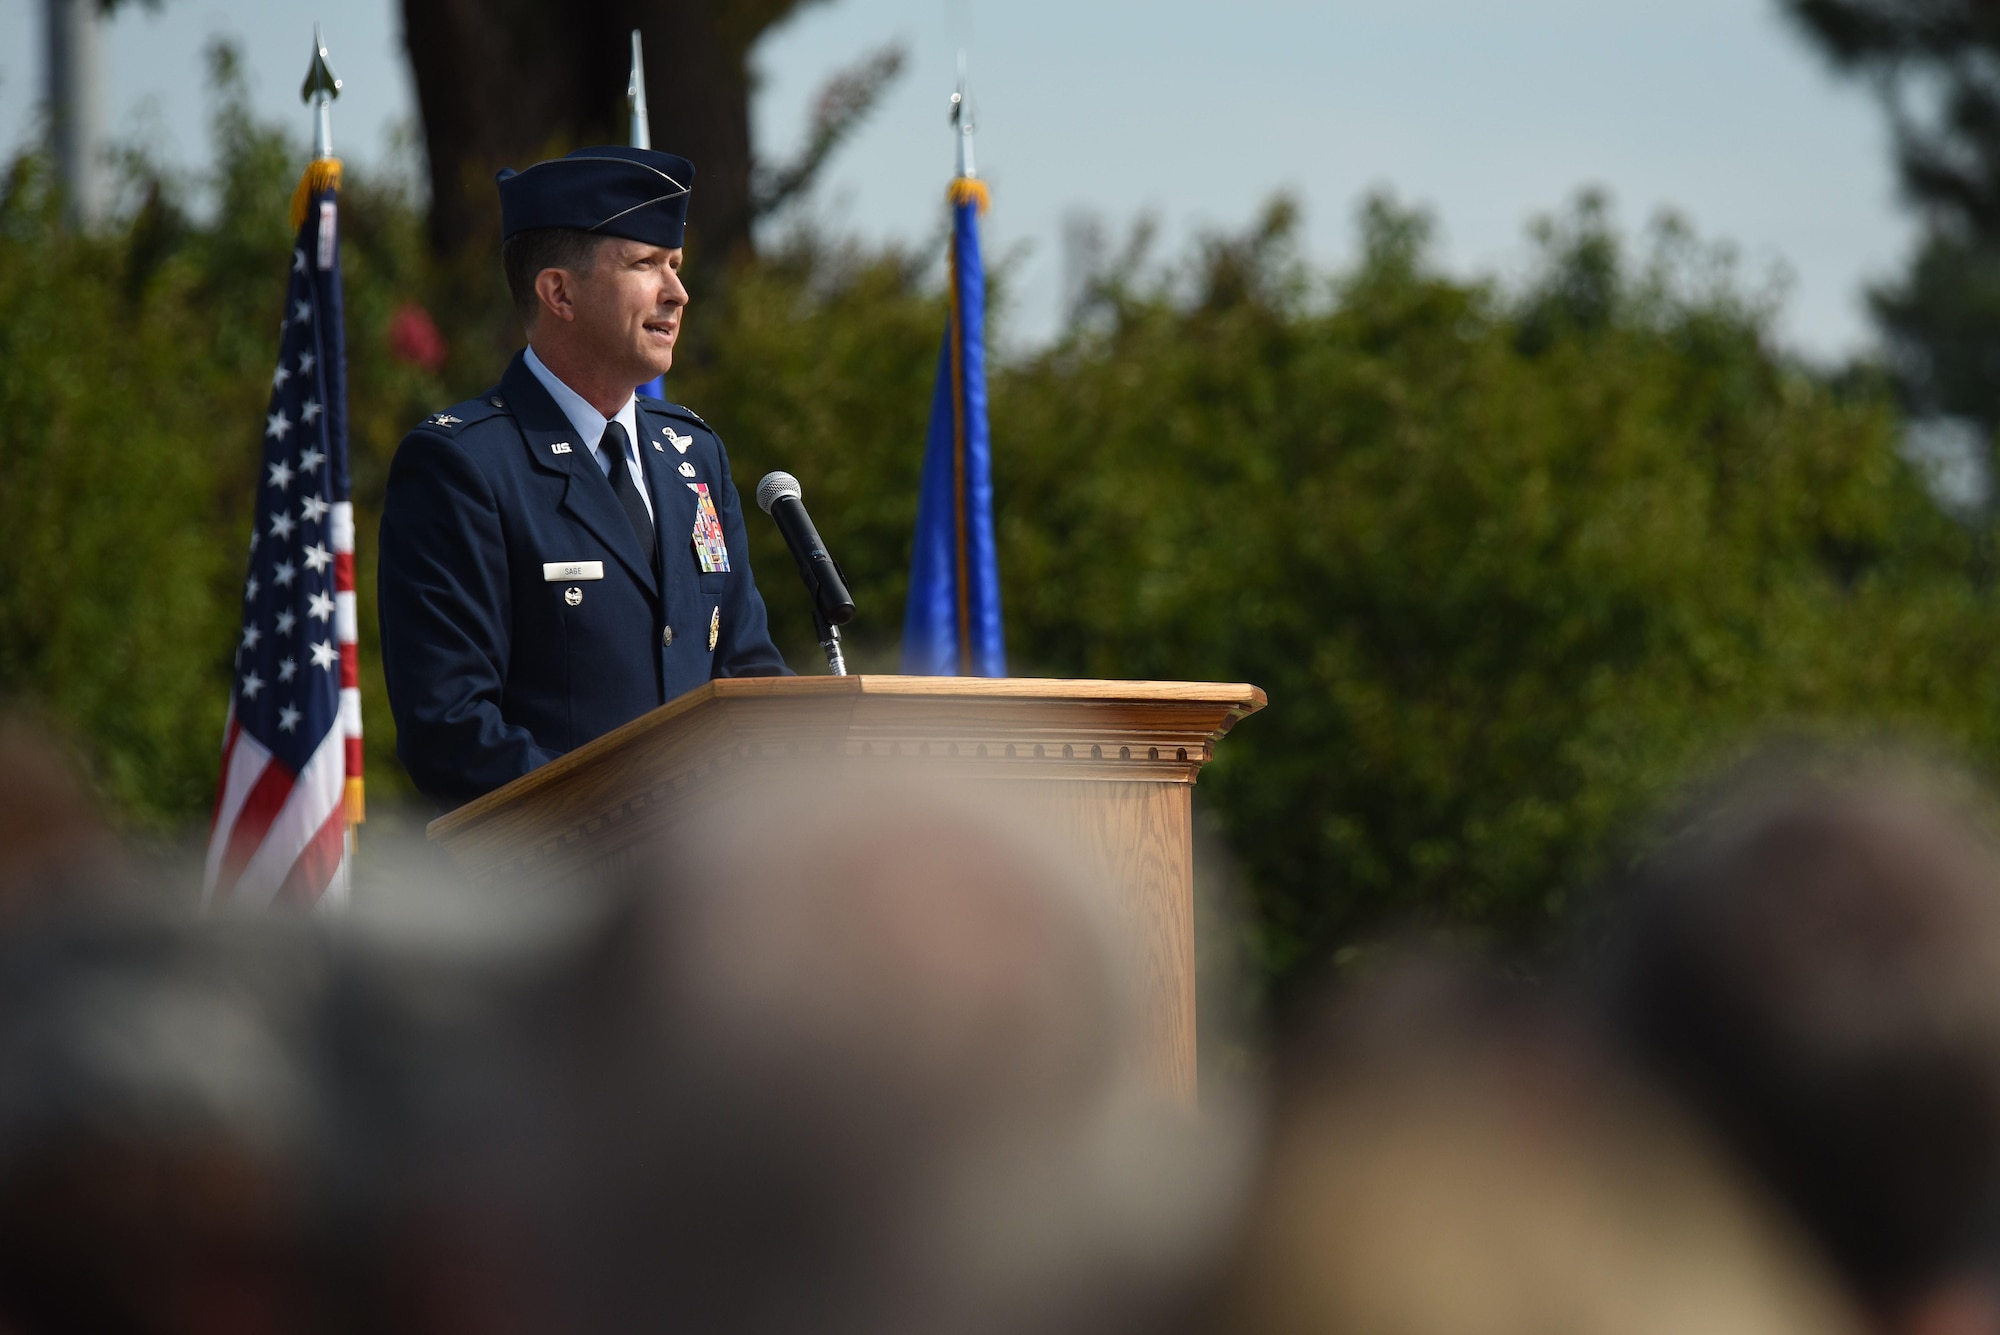 Col. Christopher Sage, 4th Fighter Wing commander, speaks to Airmen after assuming command of the 4th Fighter Wing, June 30, 2014, at Seymour Johnson Air Force Base, North Carolina. Sage has supported operations NORTHERN WATCH, DELIBERATE FORGE, ALLIED FORCE, ENDURING FREEDOM and IRAQI FREEDOM and has logged more than 4,100 flight hours during his 22-year career. (U.S. Air Force photo by Senior Airman Brittain Crolley)